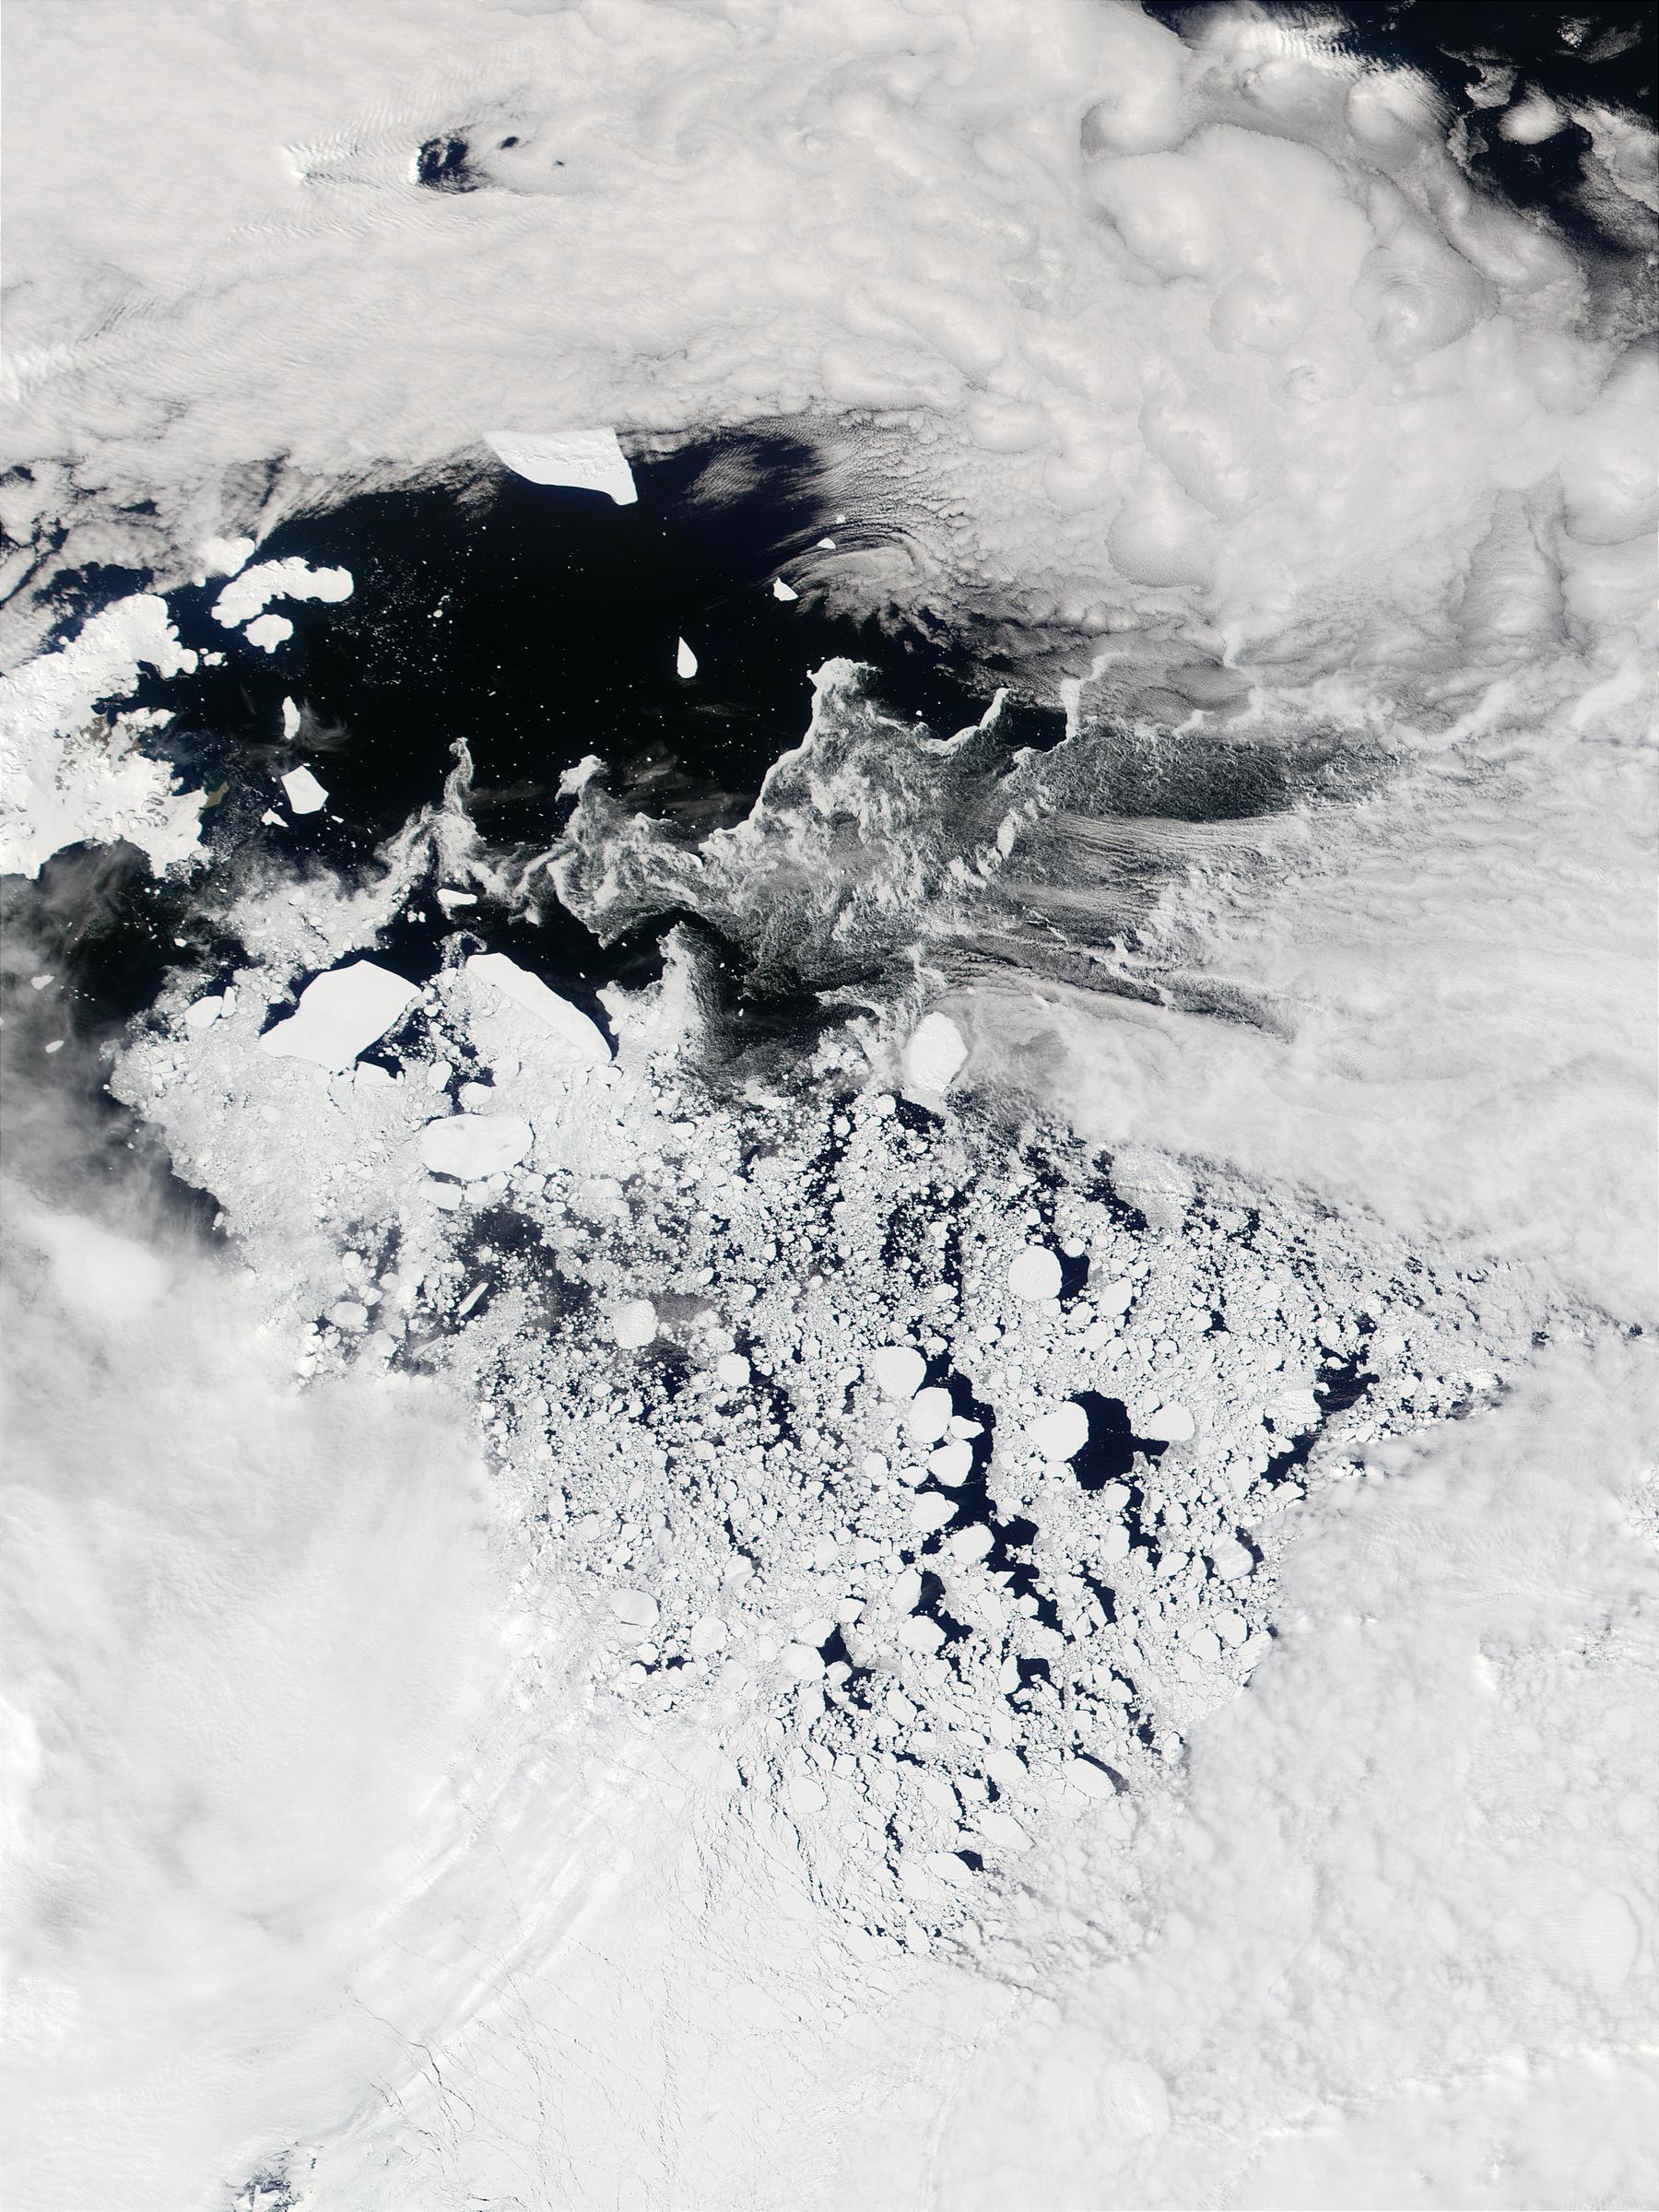 Northern Weddell Sea, Antarctica - related image preview